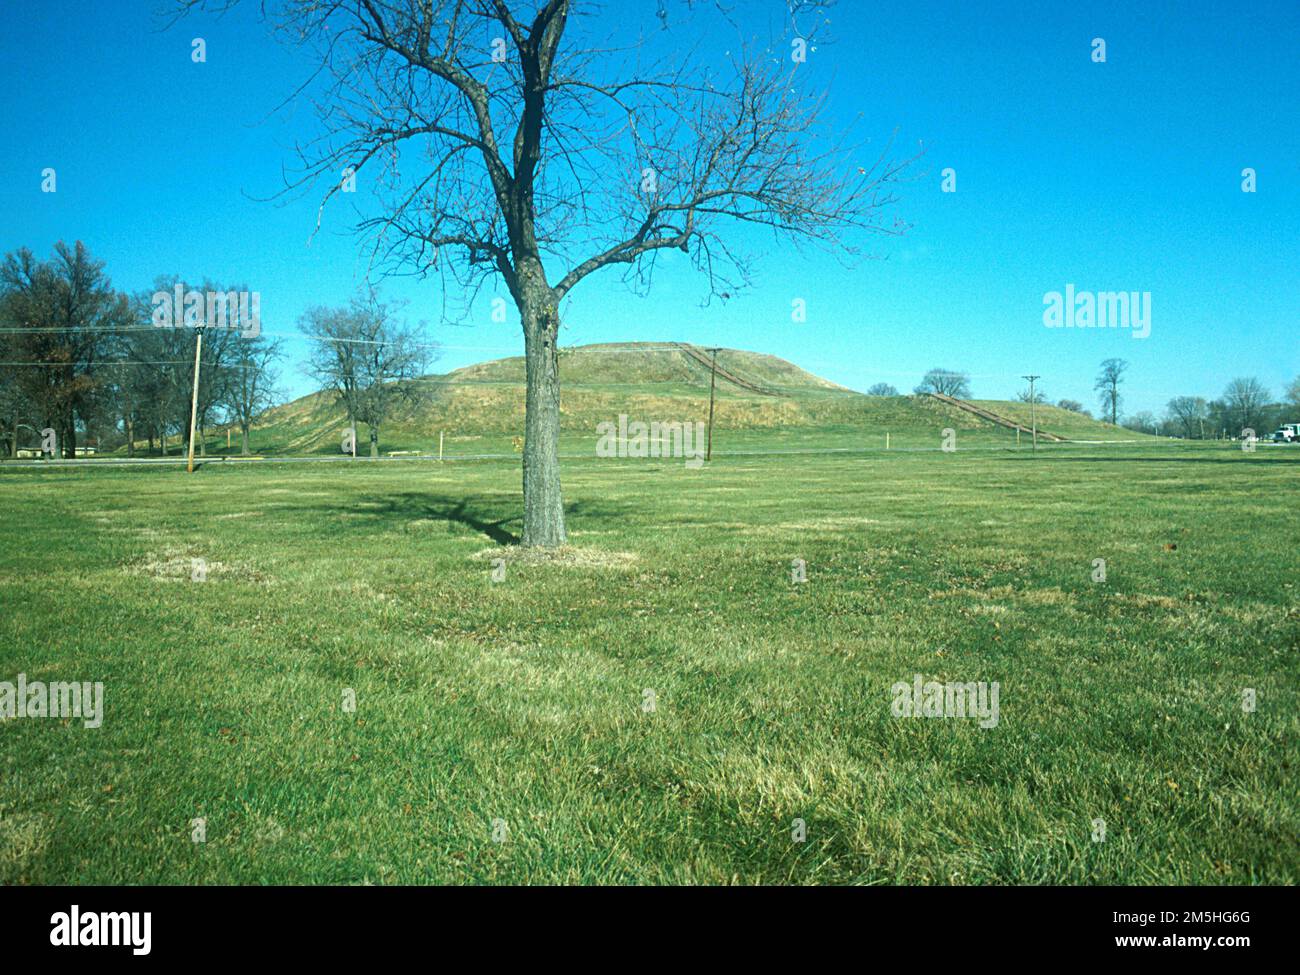 Historic National Road - Cahokia Mounds State Historic Site. In the distance, the grass covered Monks Mound rises up from the flat surrounding area at Cahokia Mounds State Historic Site. Cahokia Mounds Historial Site, Illinois Stock Photo